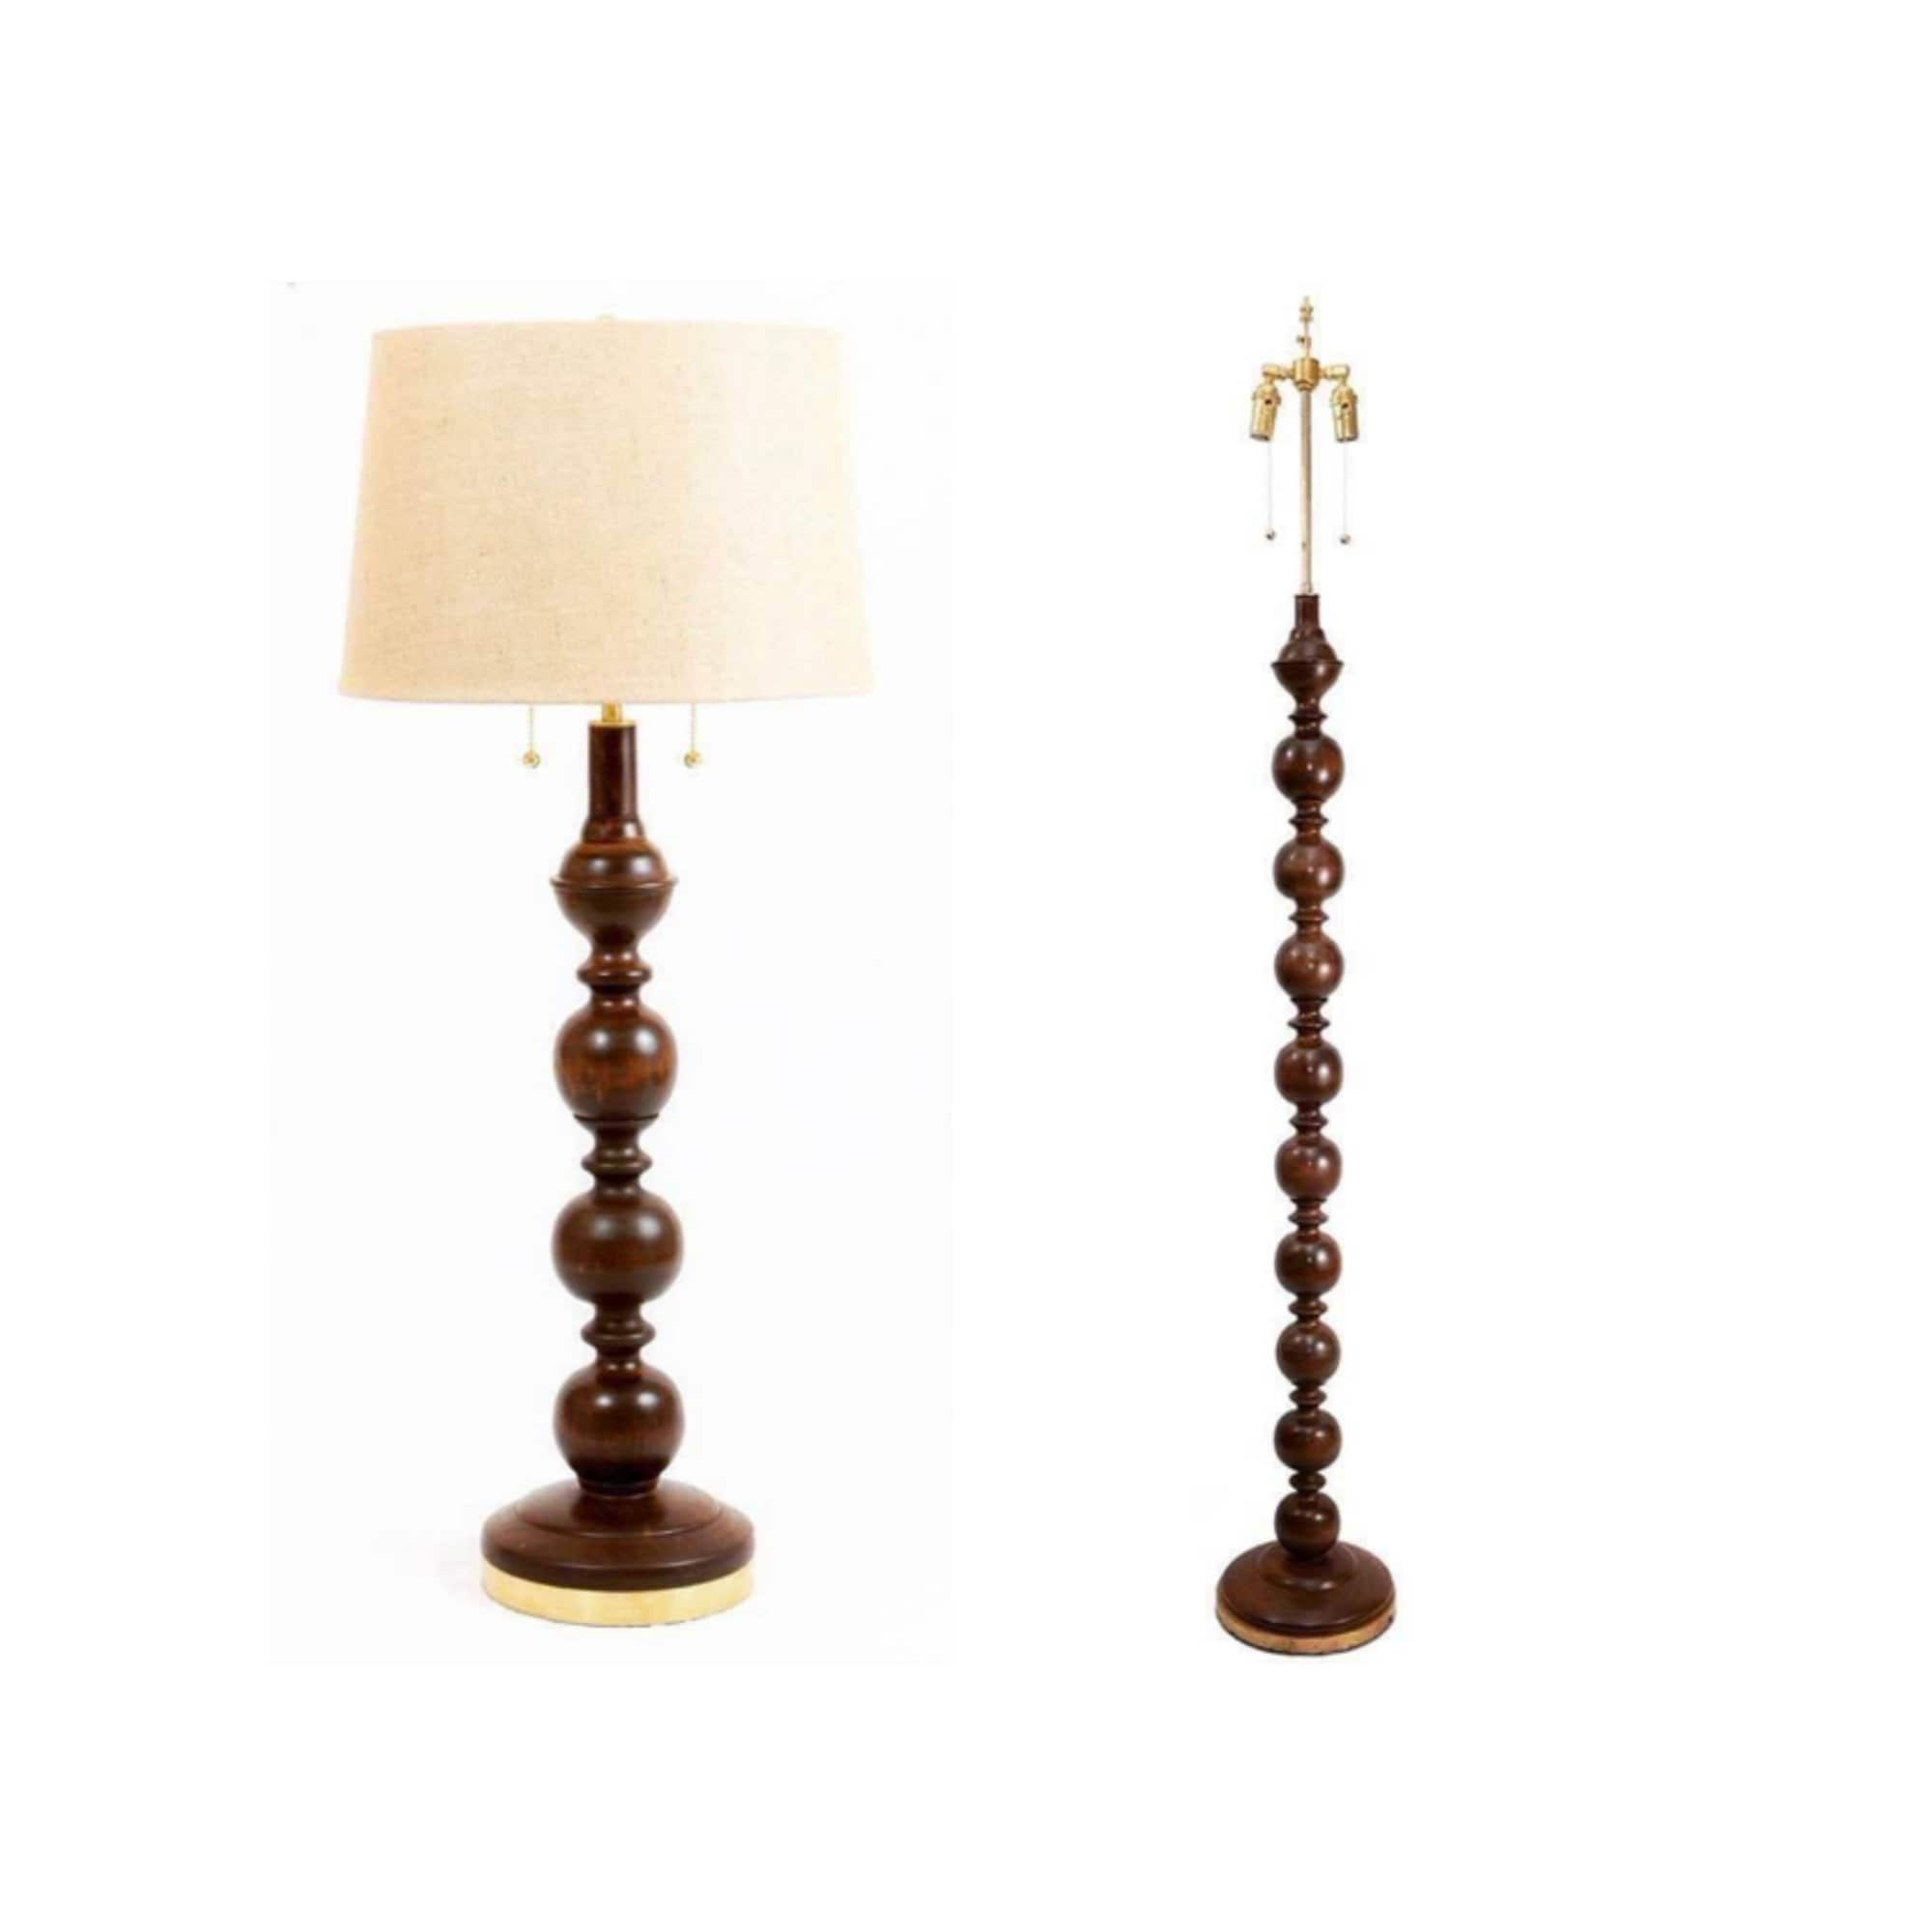 Cherry Floor And Table Lamp Set 2 Table Lamps 1 Floor Lamp – Etsy Intended For 2019 Beeswax Finish Standing Lamps (View 10 of 10)